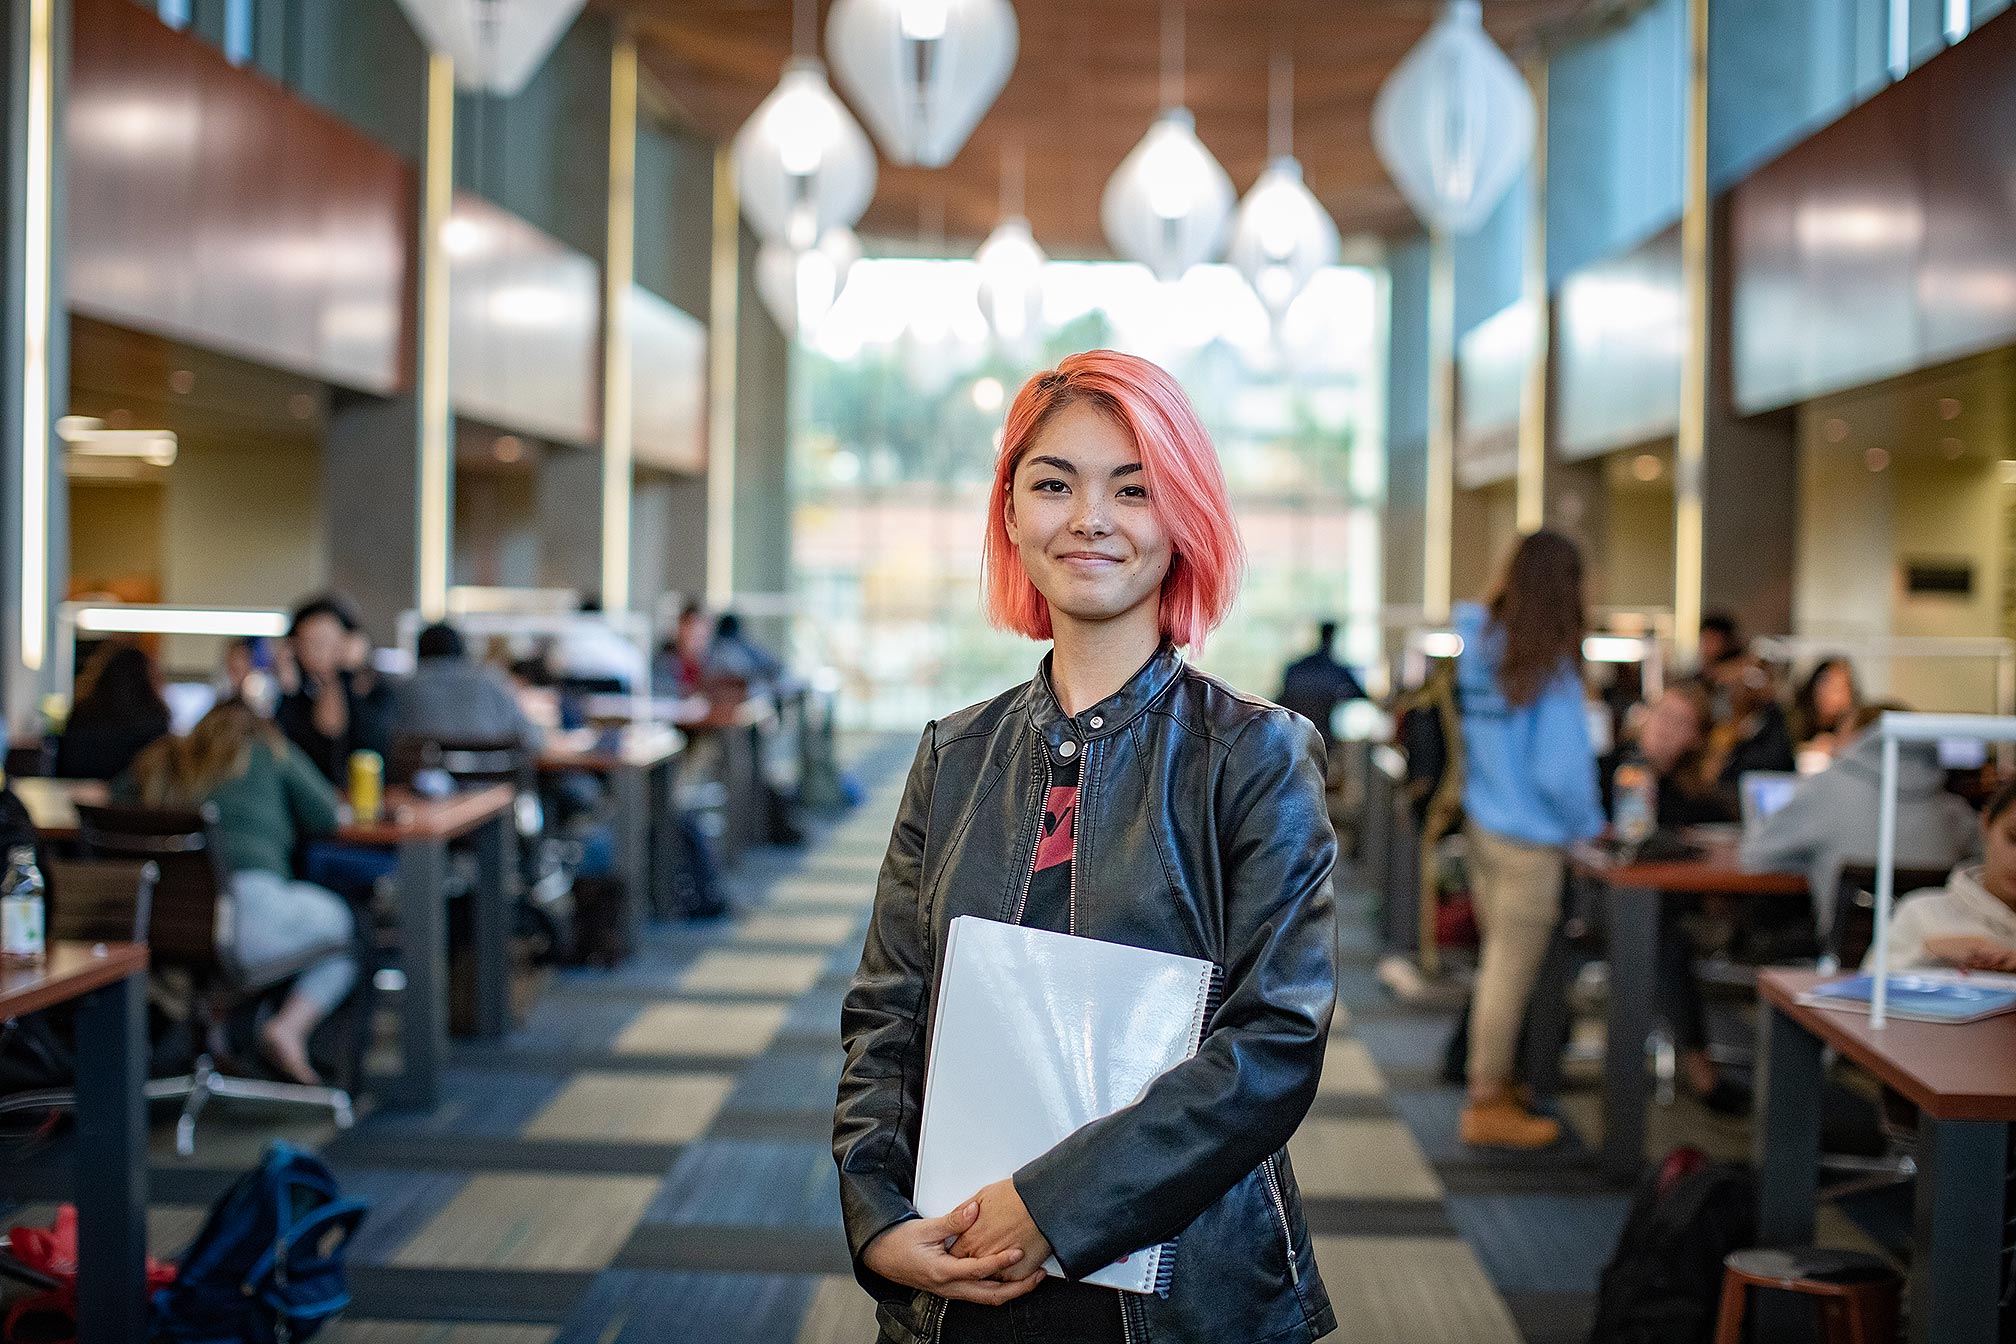 Female student with pink hair standing and posing in the library